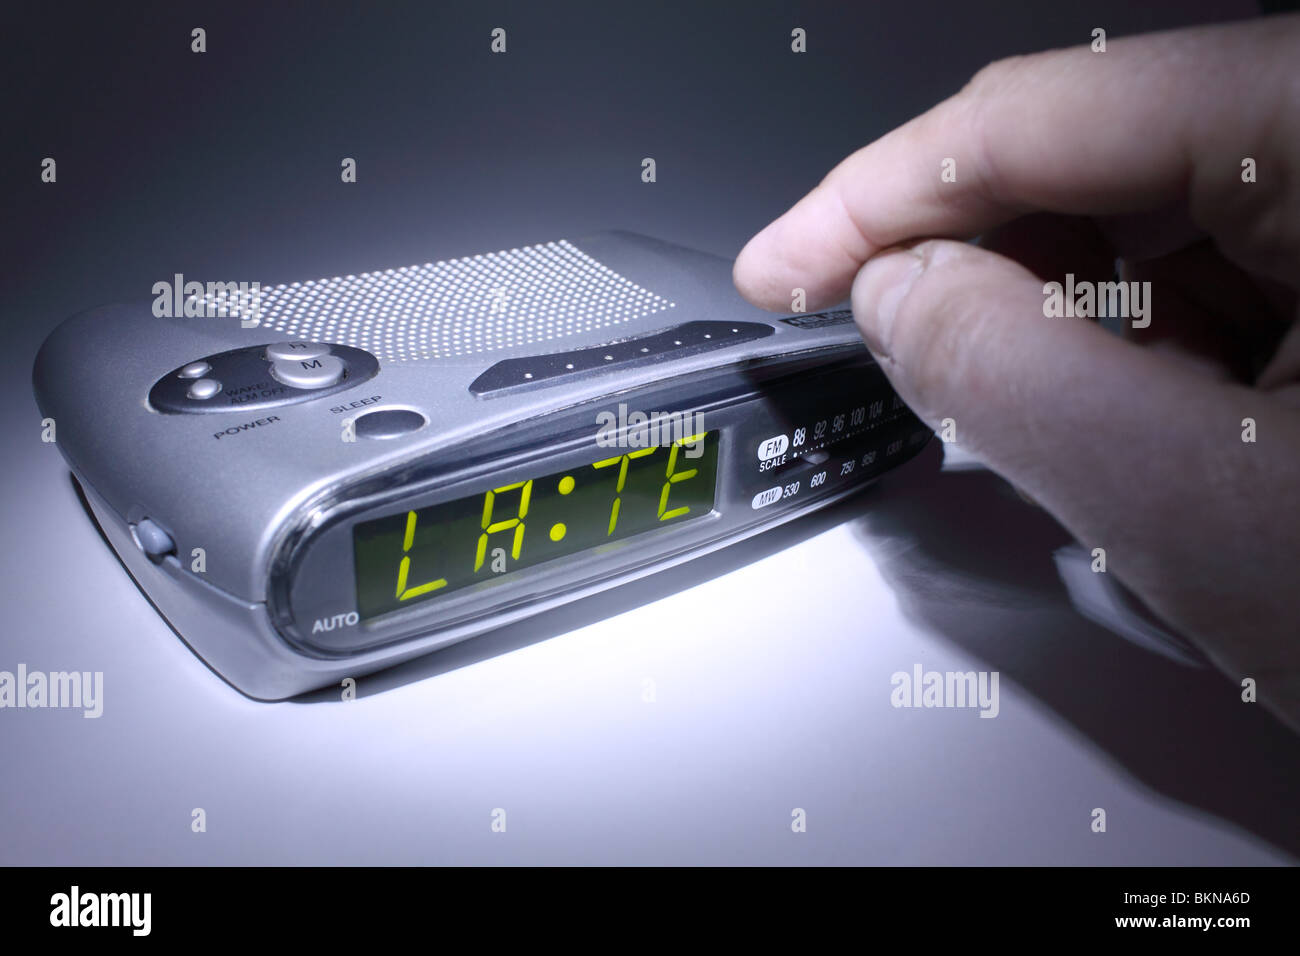 switching off an electronic alarm clock indicating 'LATE' on the digital display Stock Photo